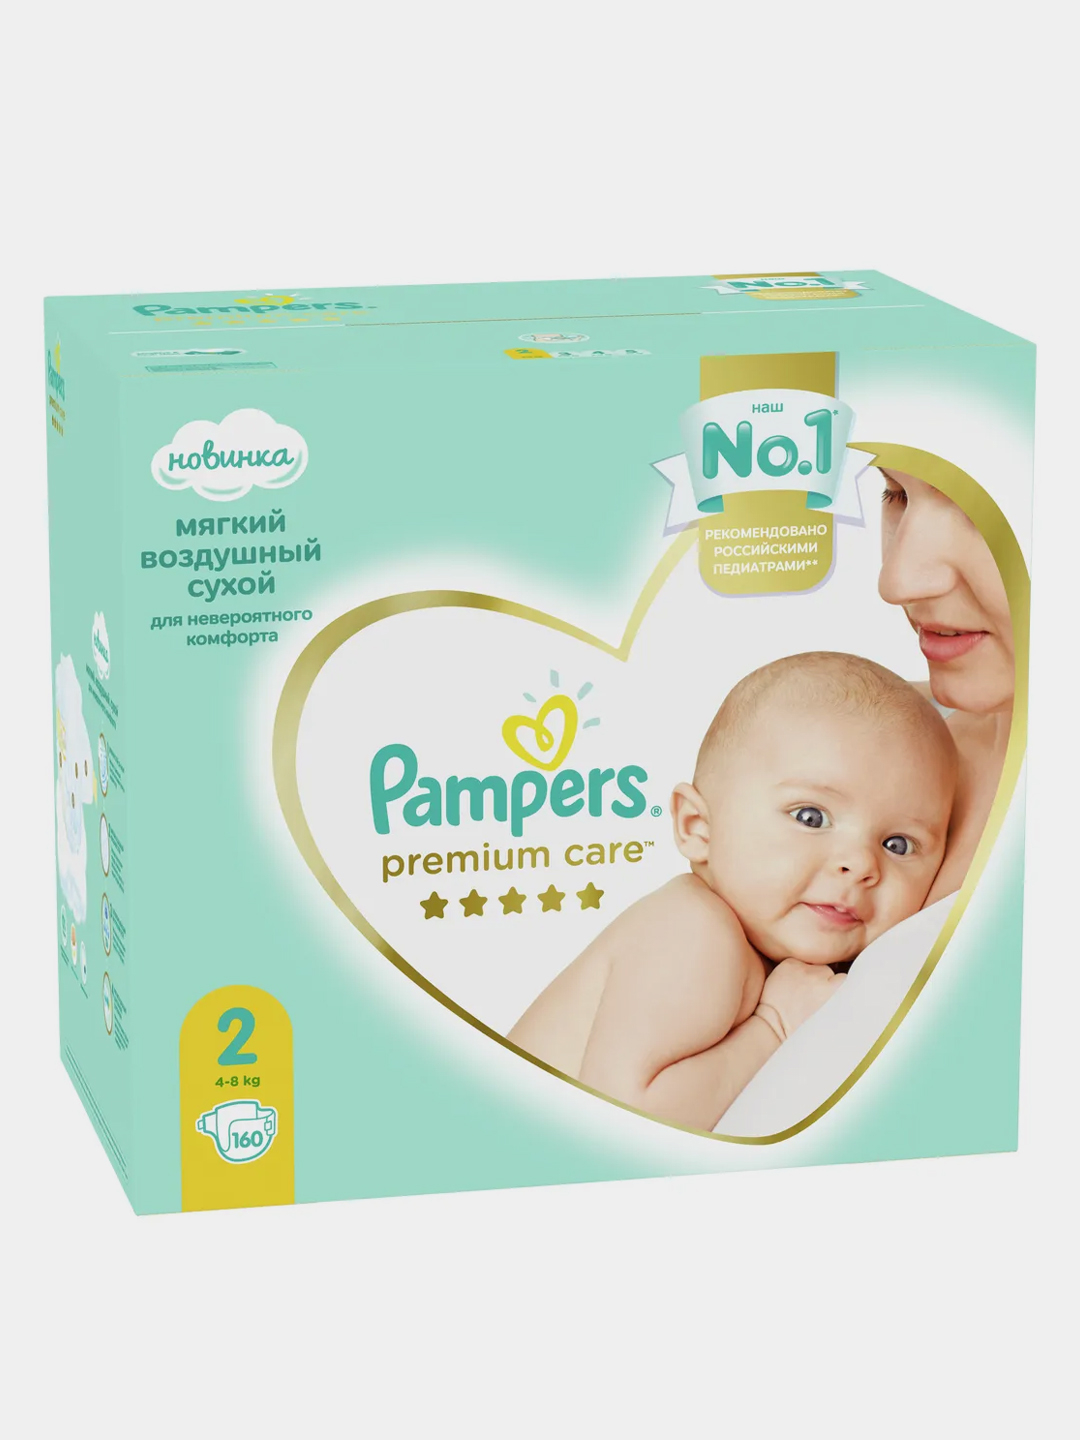 castelli pampers